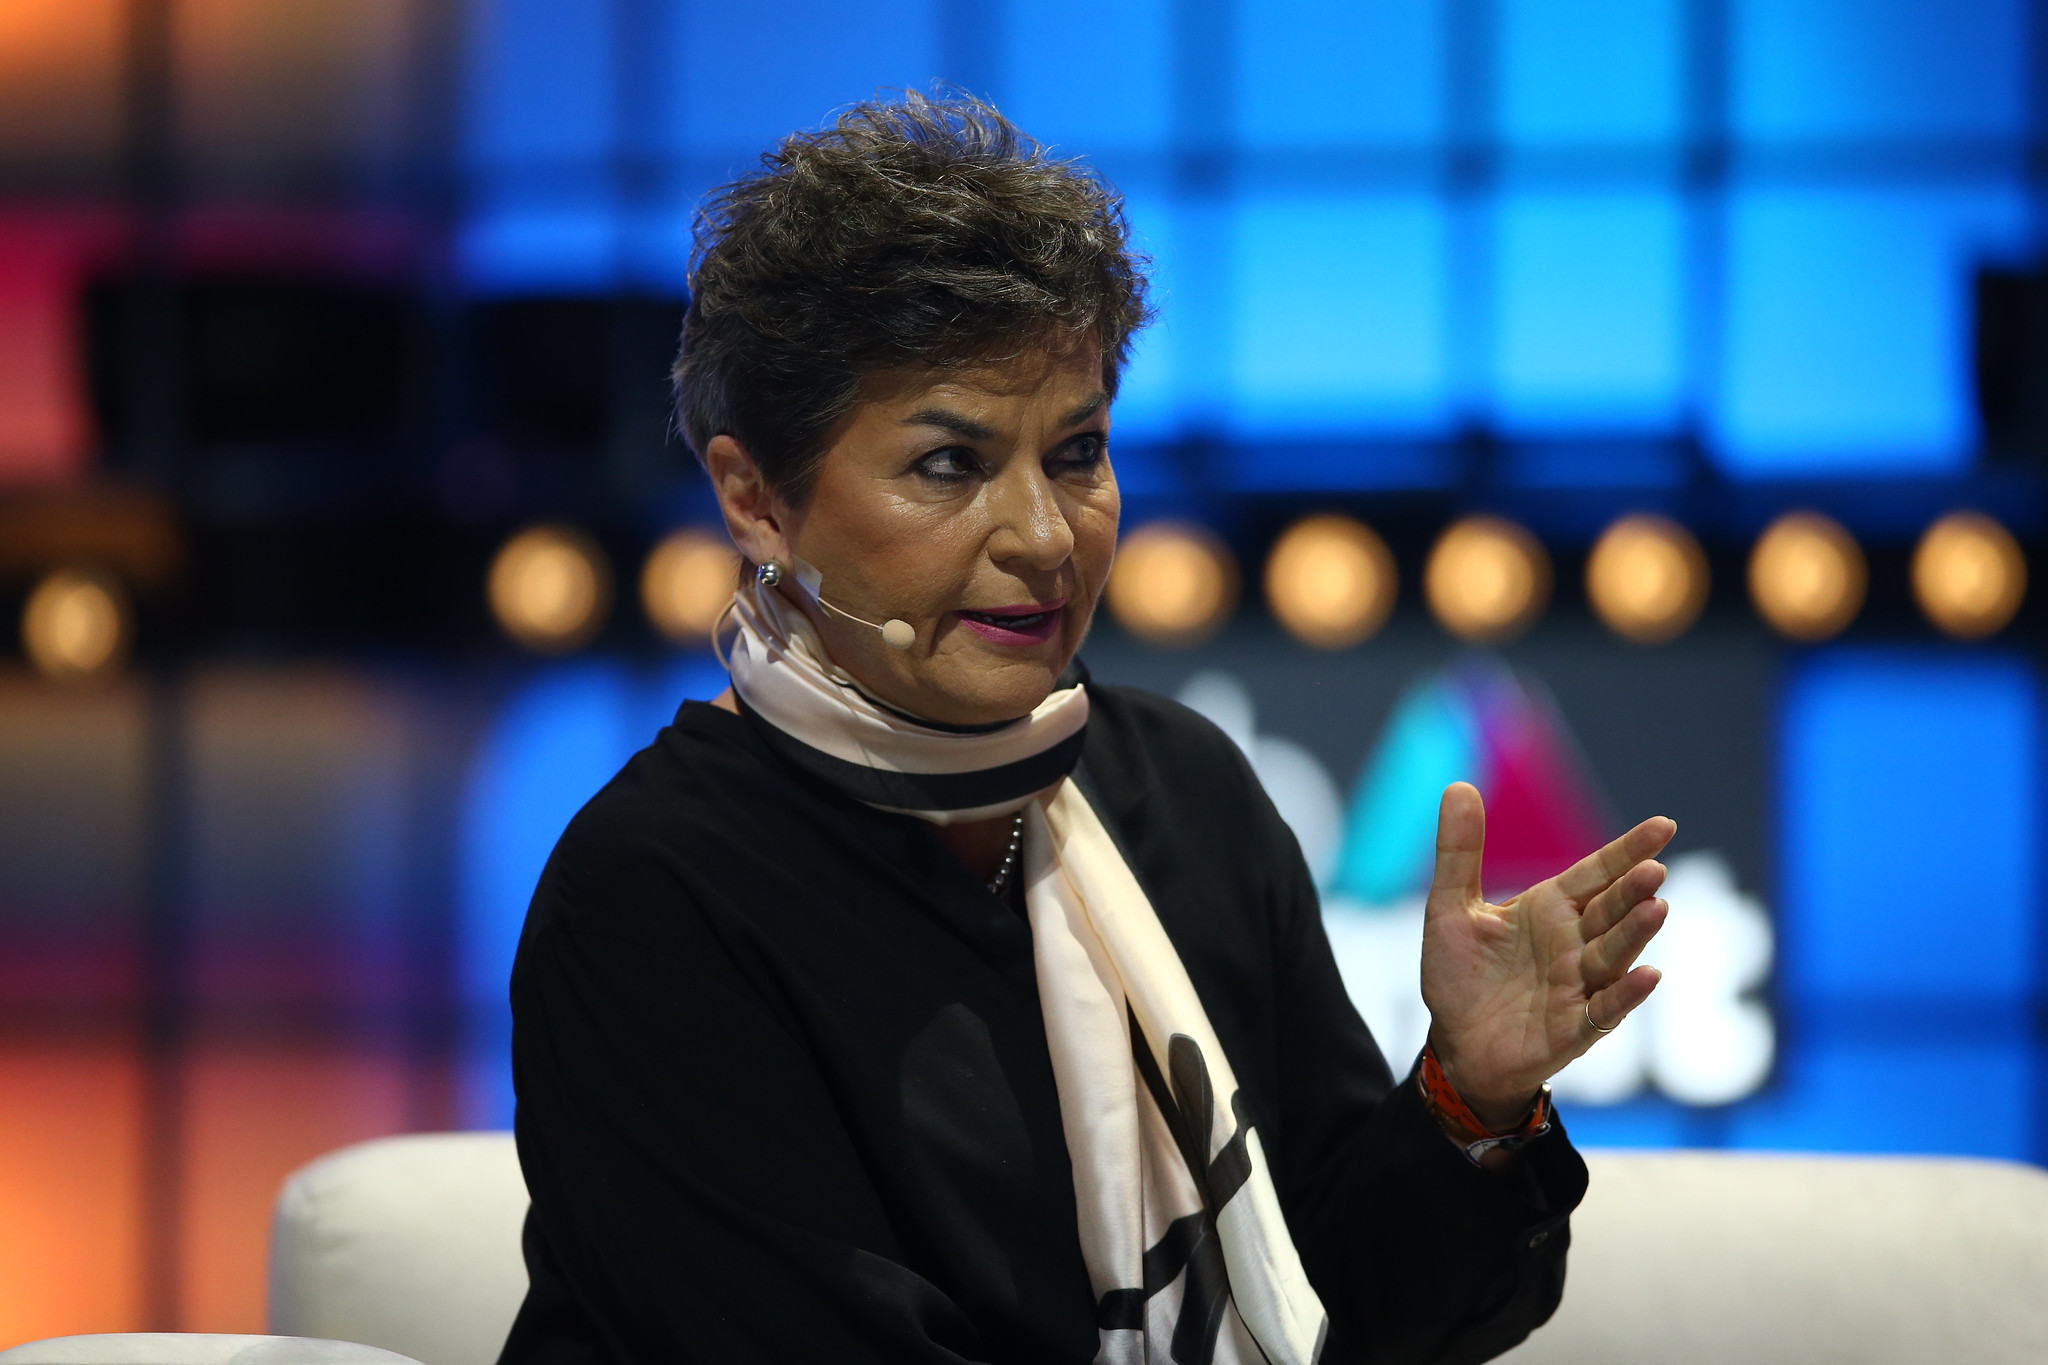 Christiana Figueres, Founding Partner, Global Optimism, on Centre Stage during day two of Web Summit 2019 at the Altice Arena in Lisbon, Portugal.